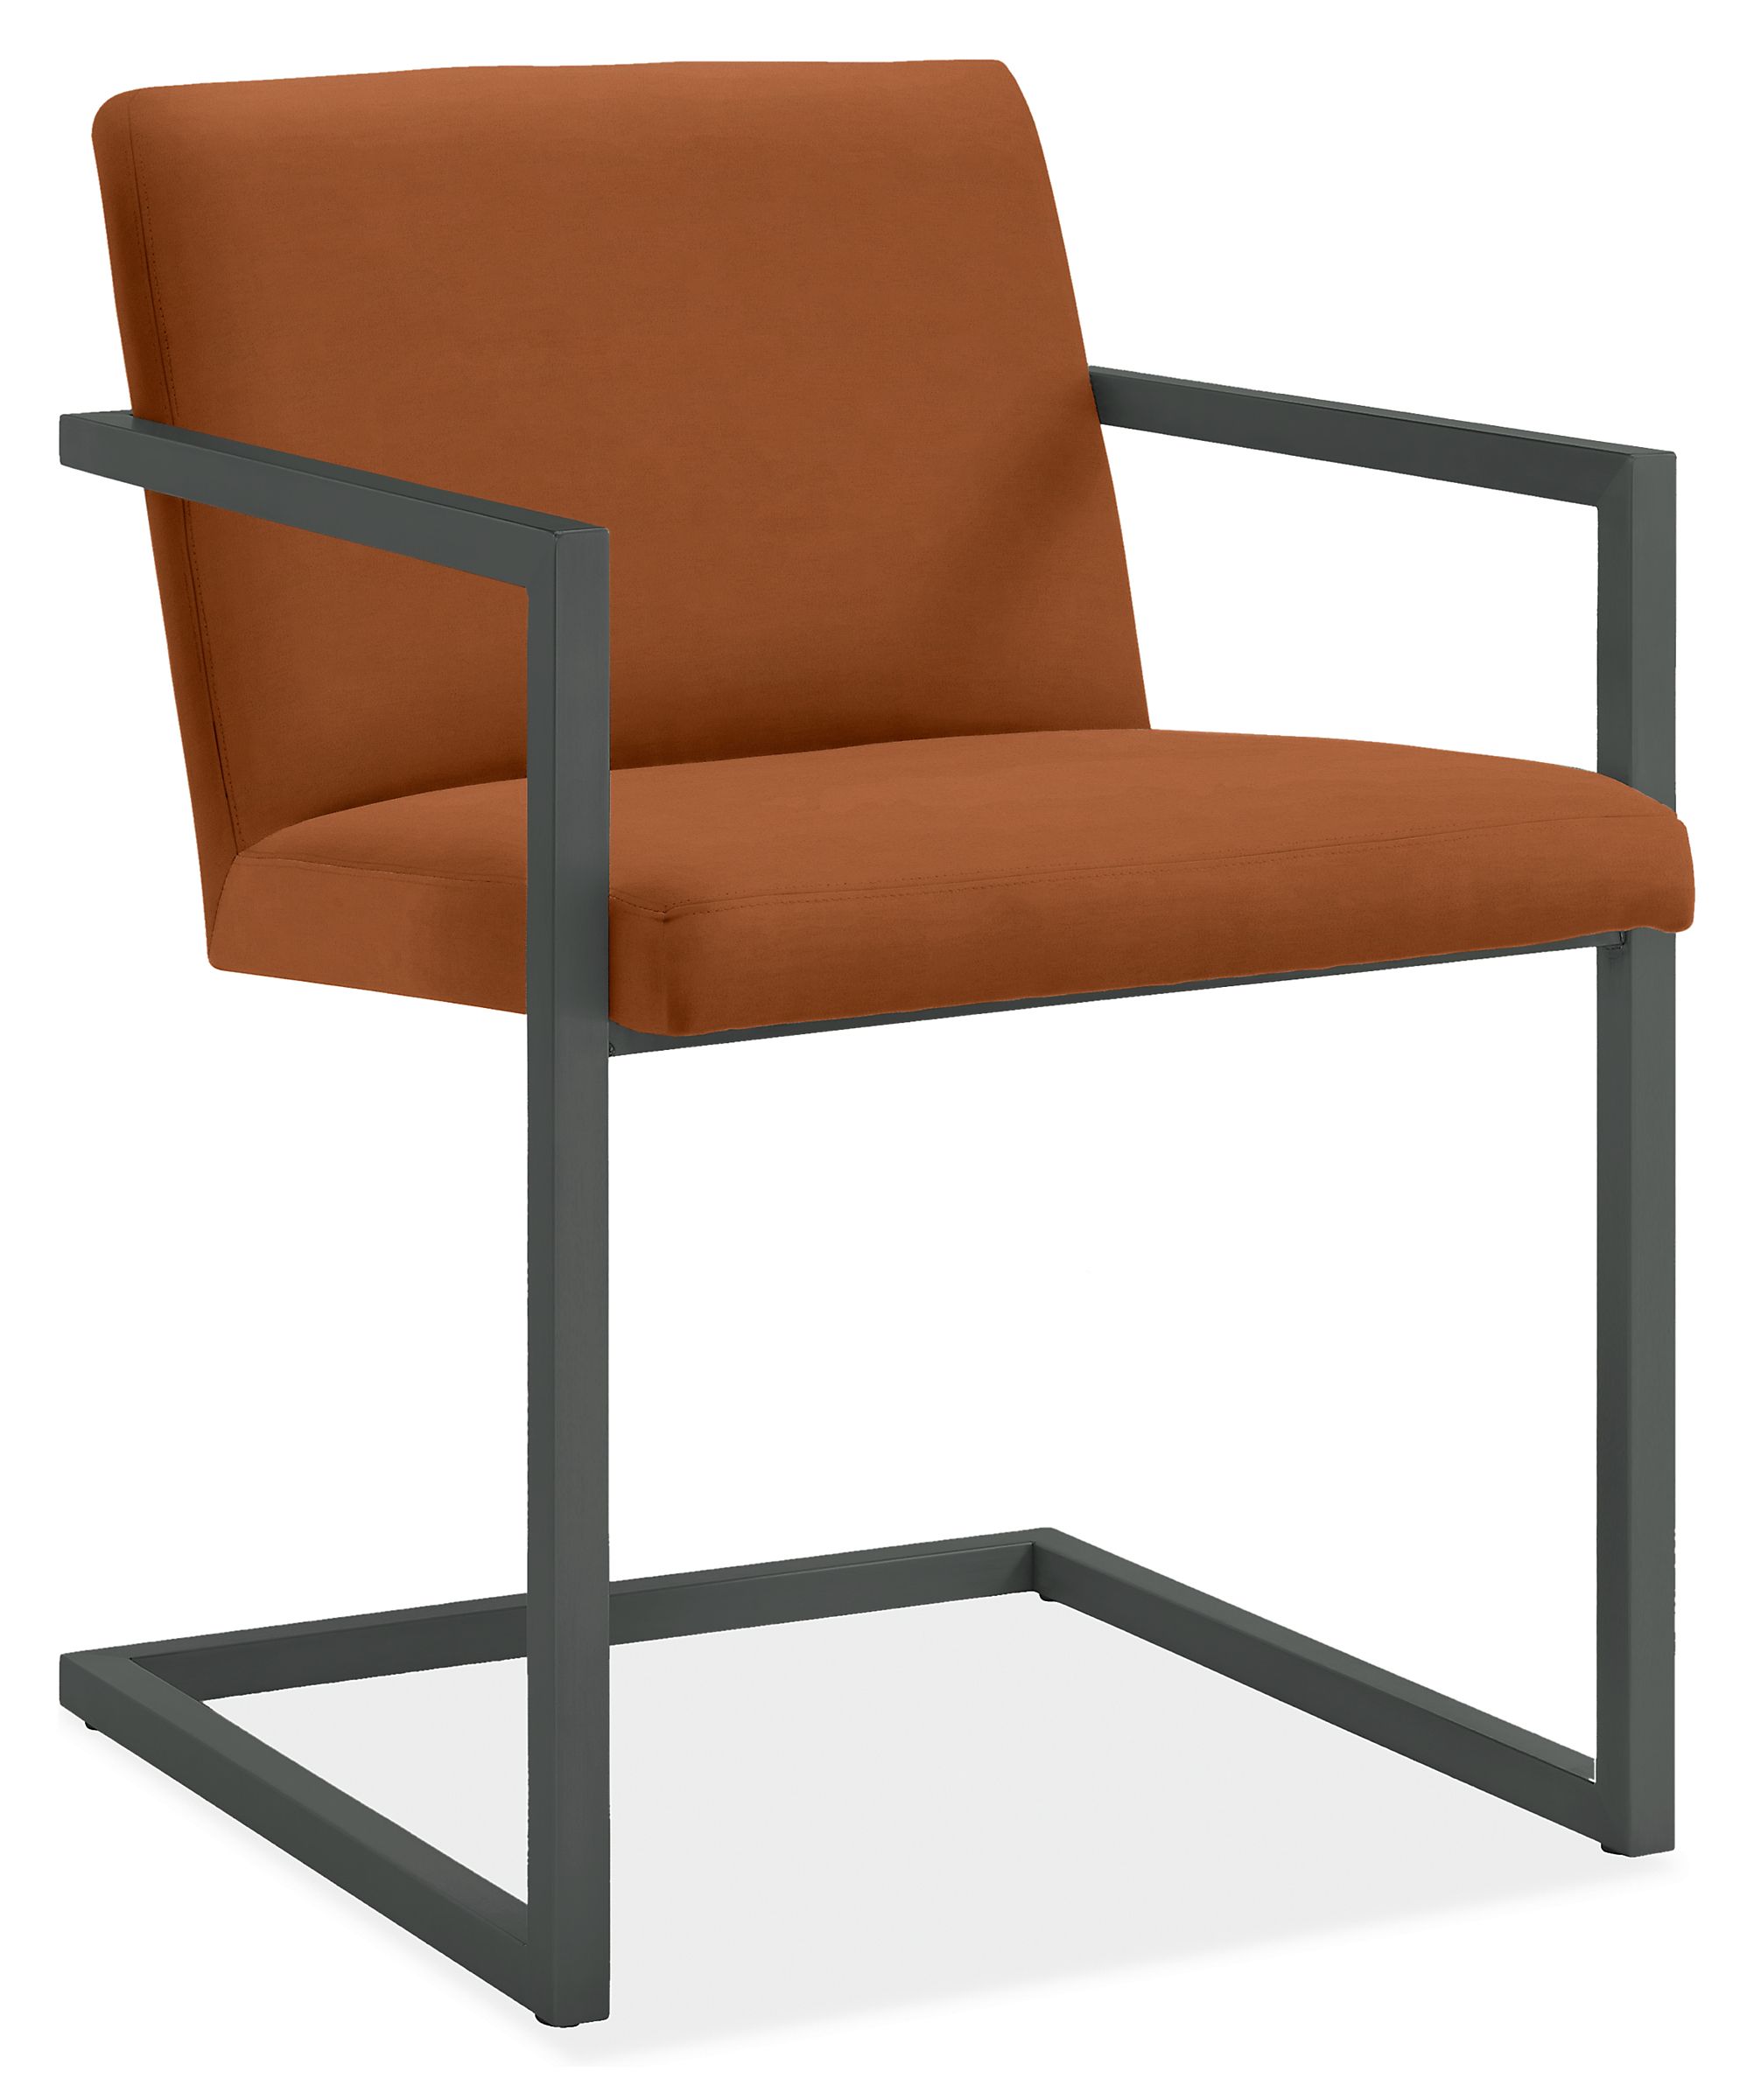 Lira Arm Chair in Banks Cognac with Graphite Frame